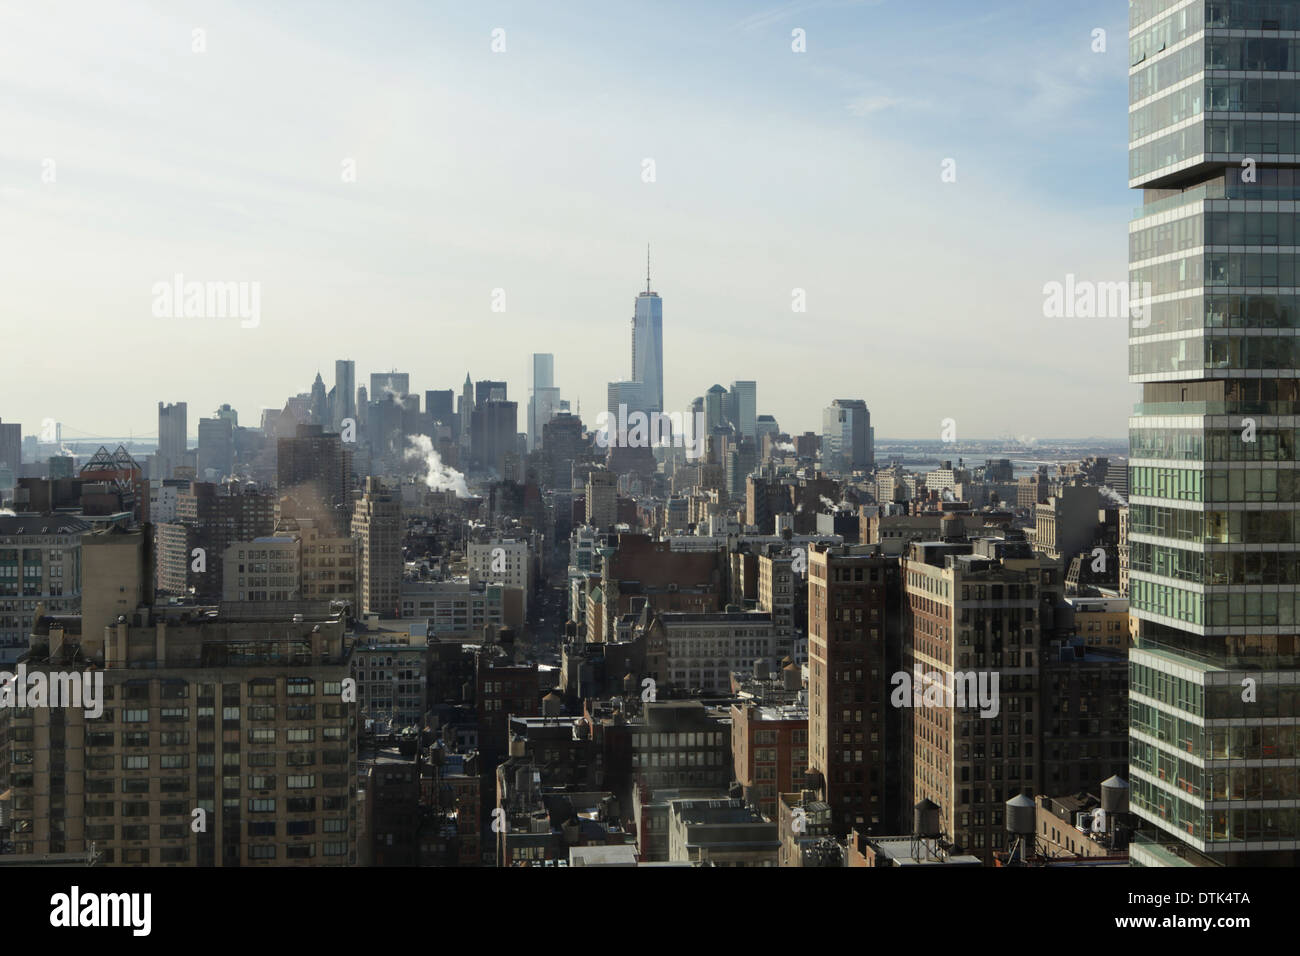 Lower Manhattan skyline including the newly-built One World Trade Center a/k/a Freedom Tower, New York, NY, January 28, 2014 Stock Photo